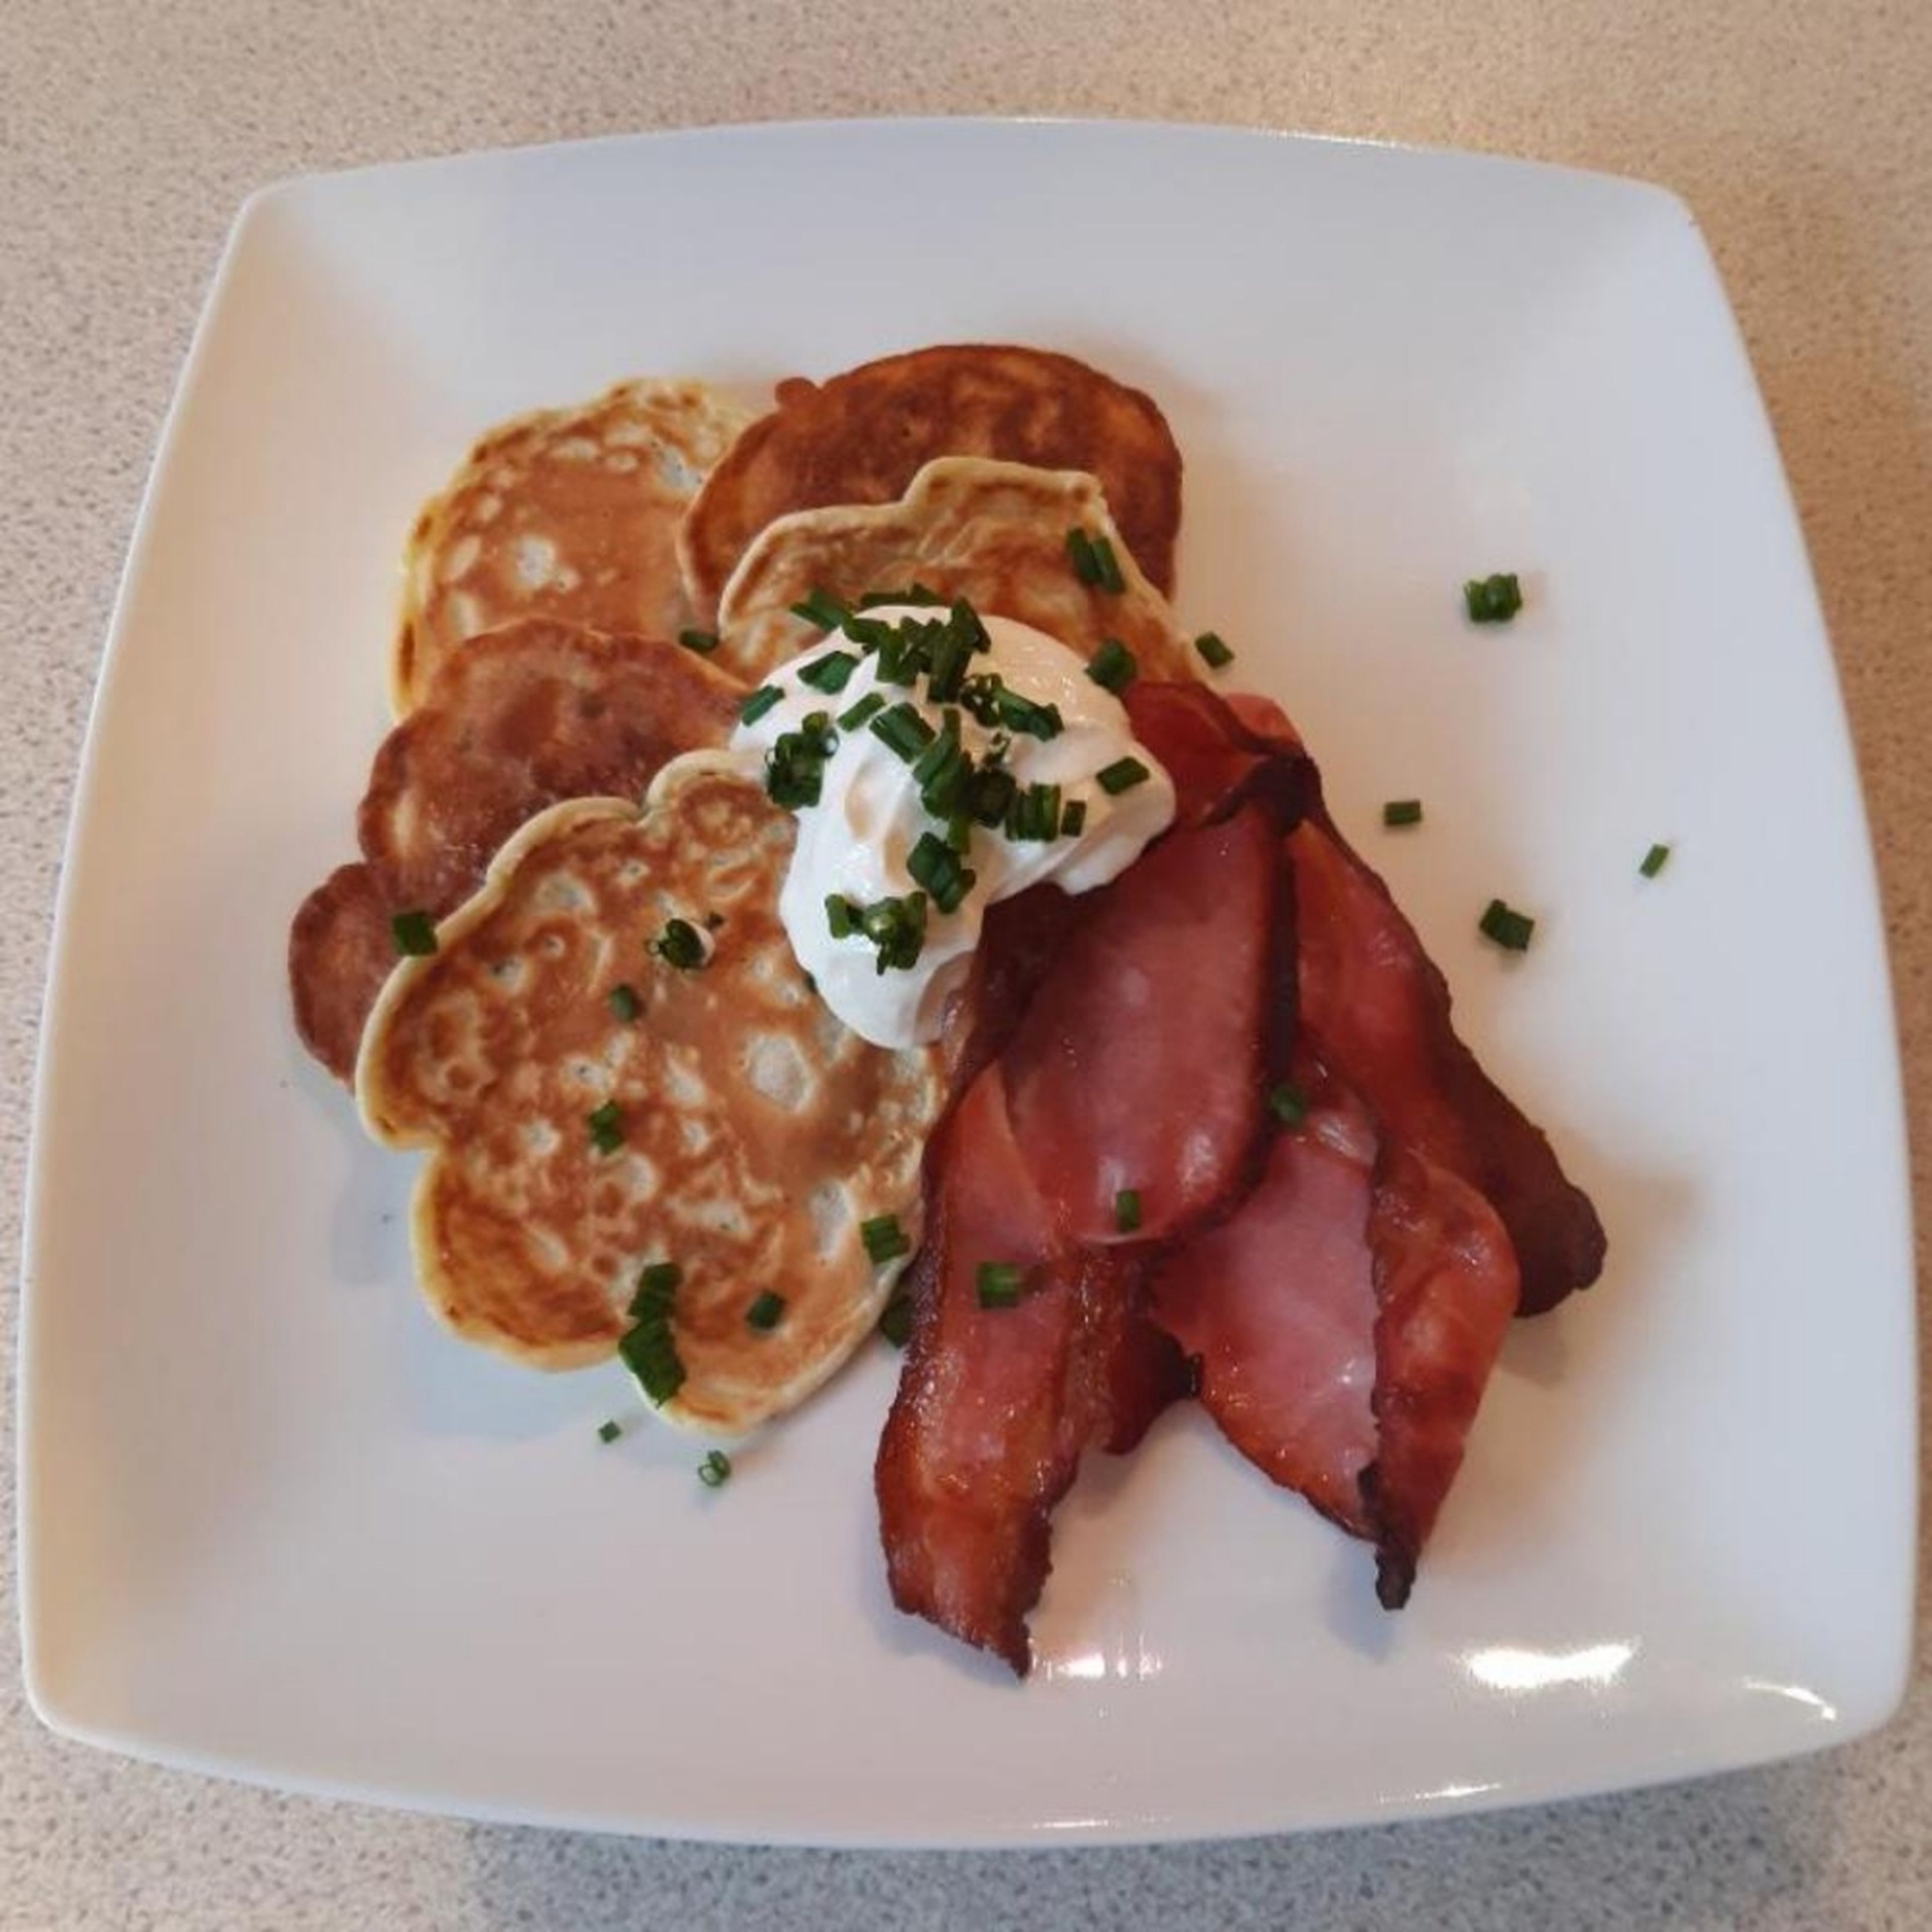 Assemble the pancakes and bacon on the plate and top with a tbsp of sour cream. Sprinkle the remaining chives over the top. Enjoy!